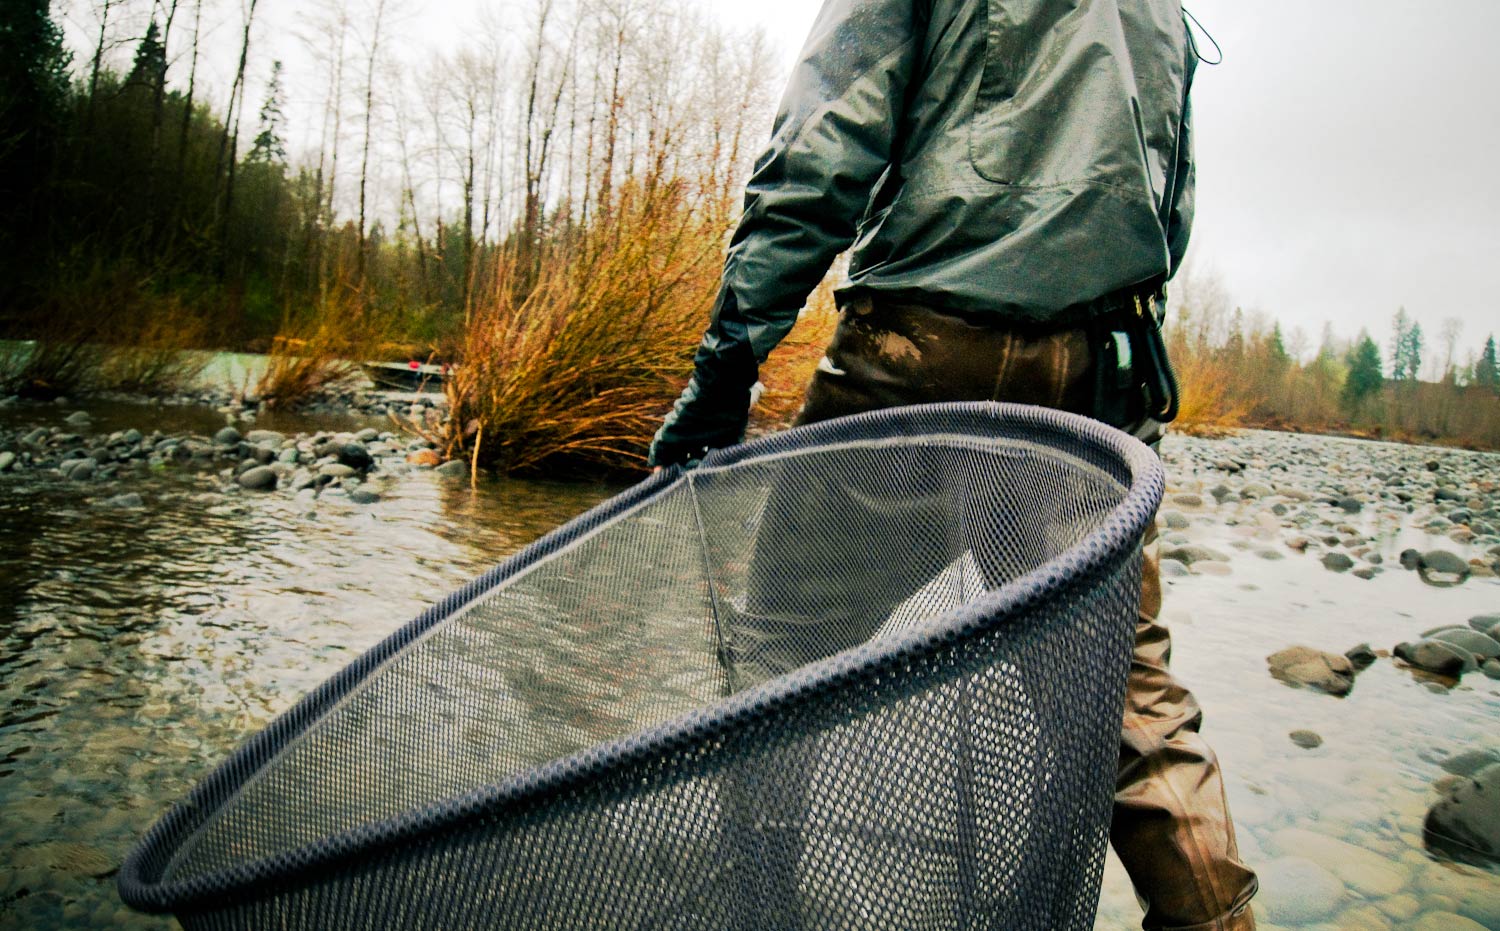 Nets, Go Big or Go Home - Fly Fishing, Gink and Gasoline